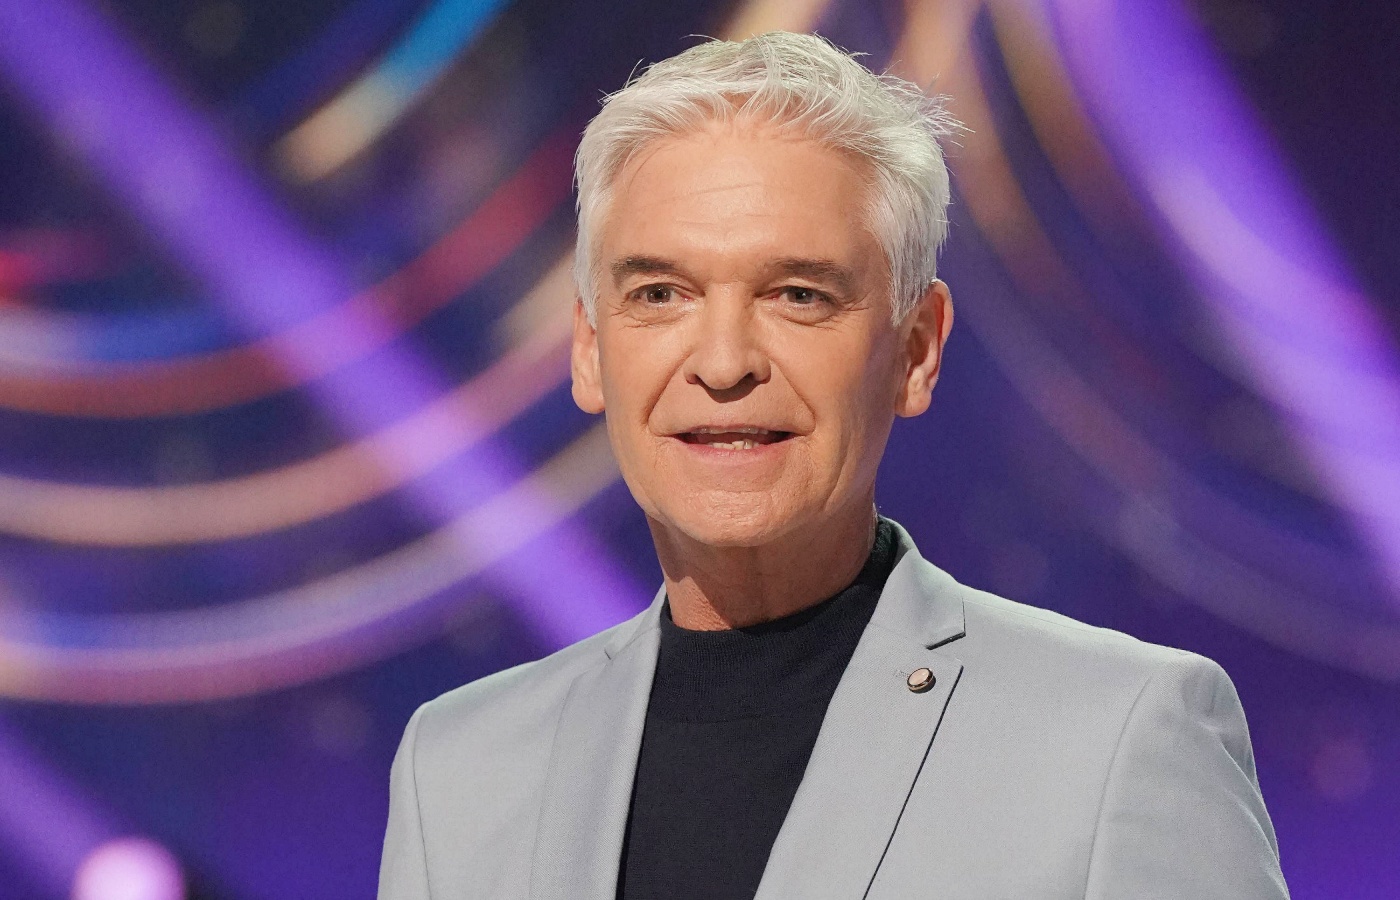 Phillip Schofield quit ITV after admitting to having an affair with a younger colleague 